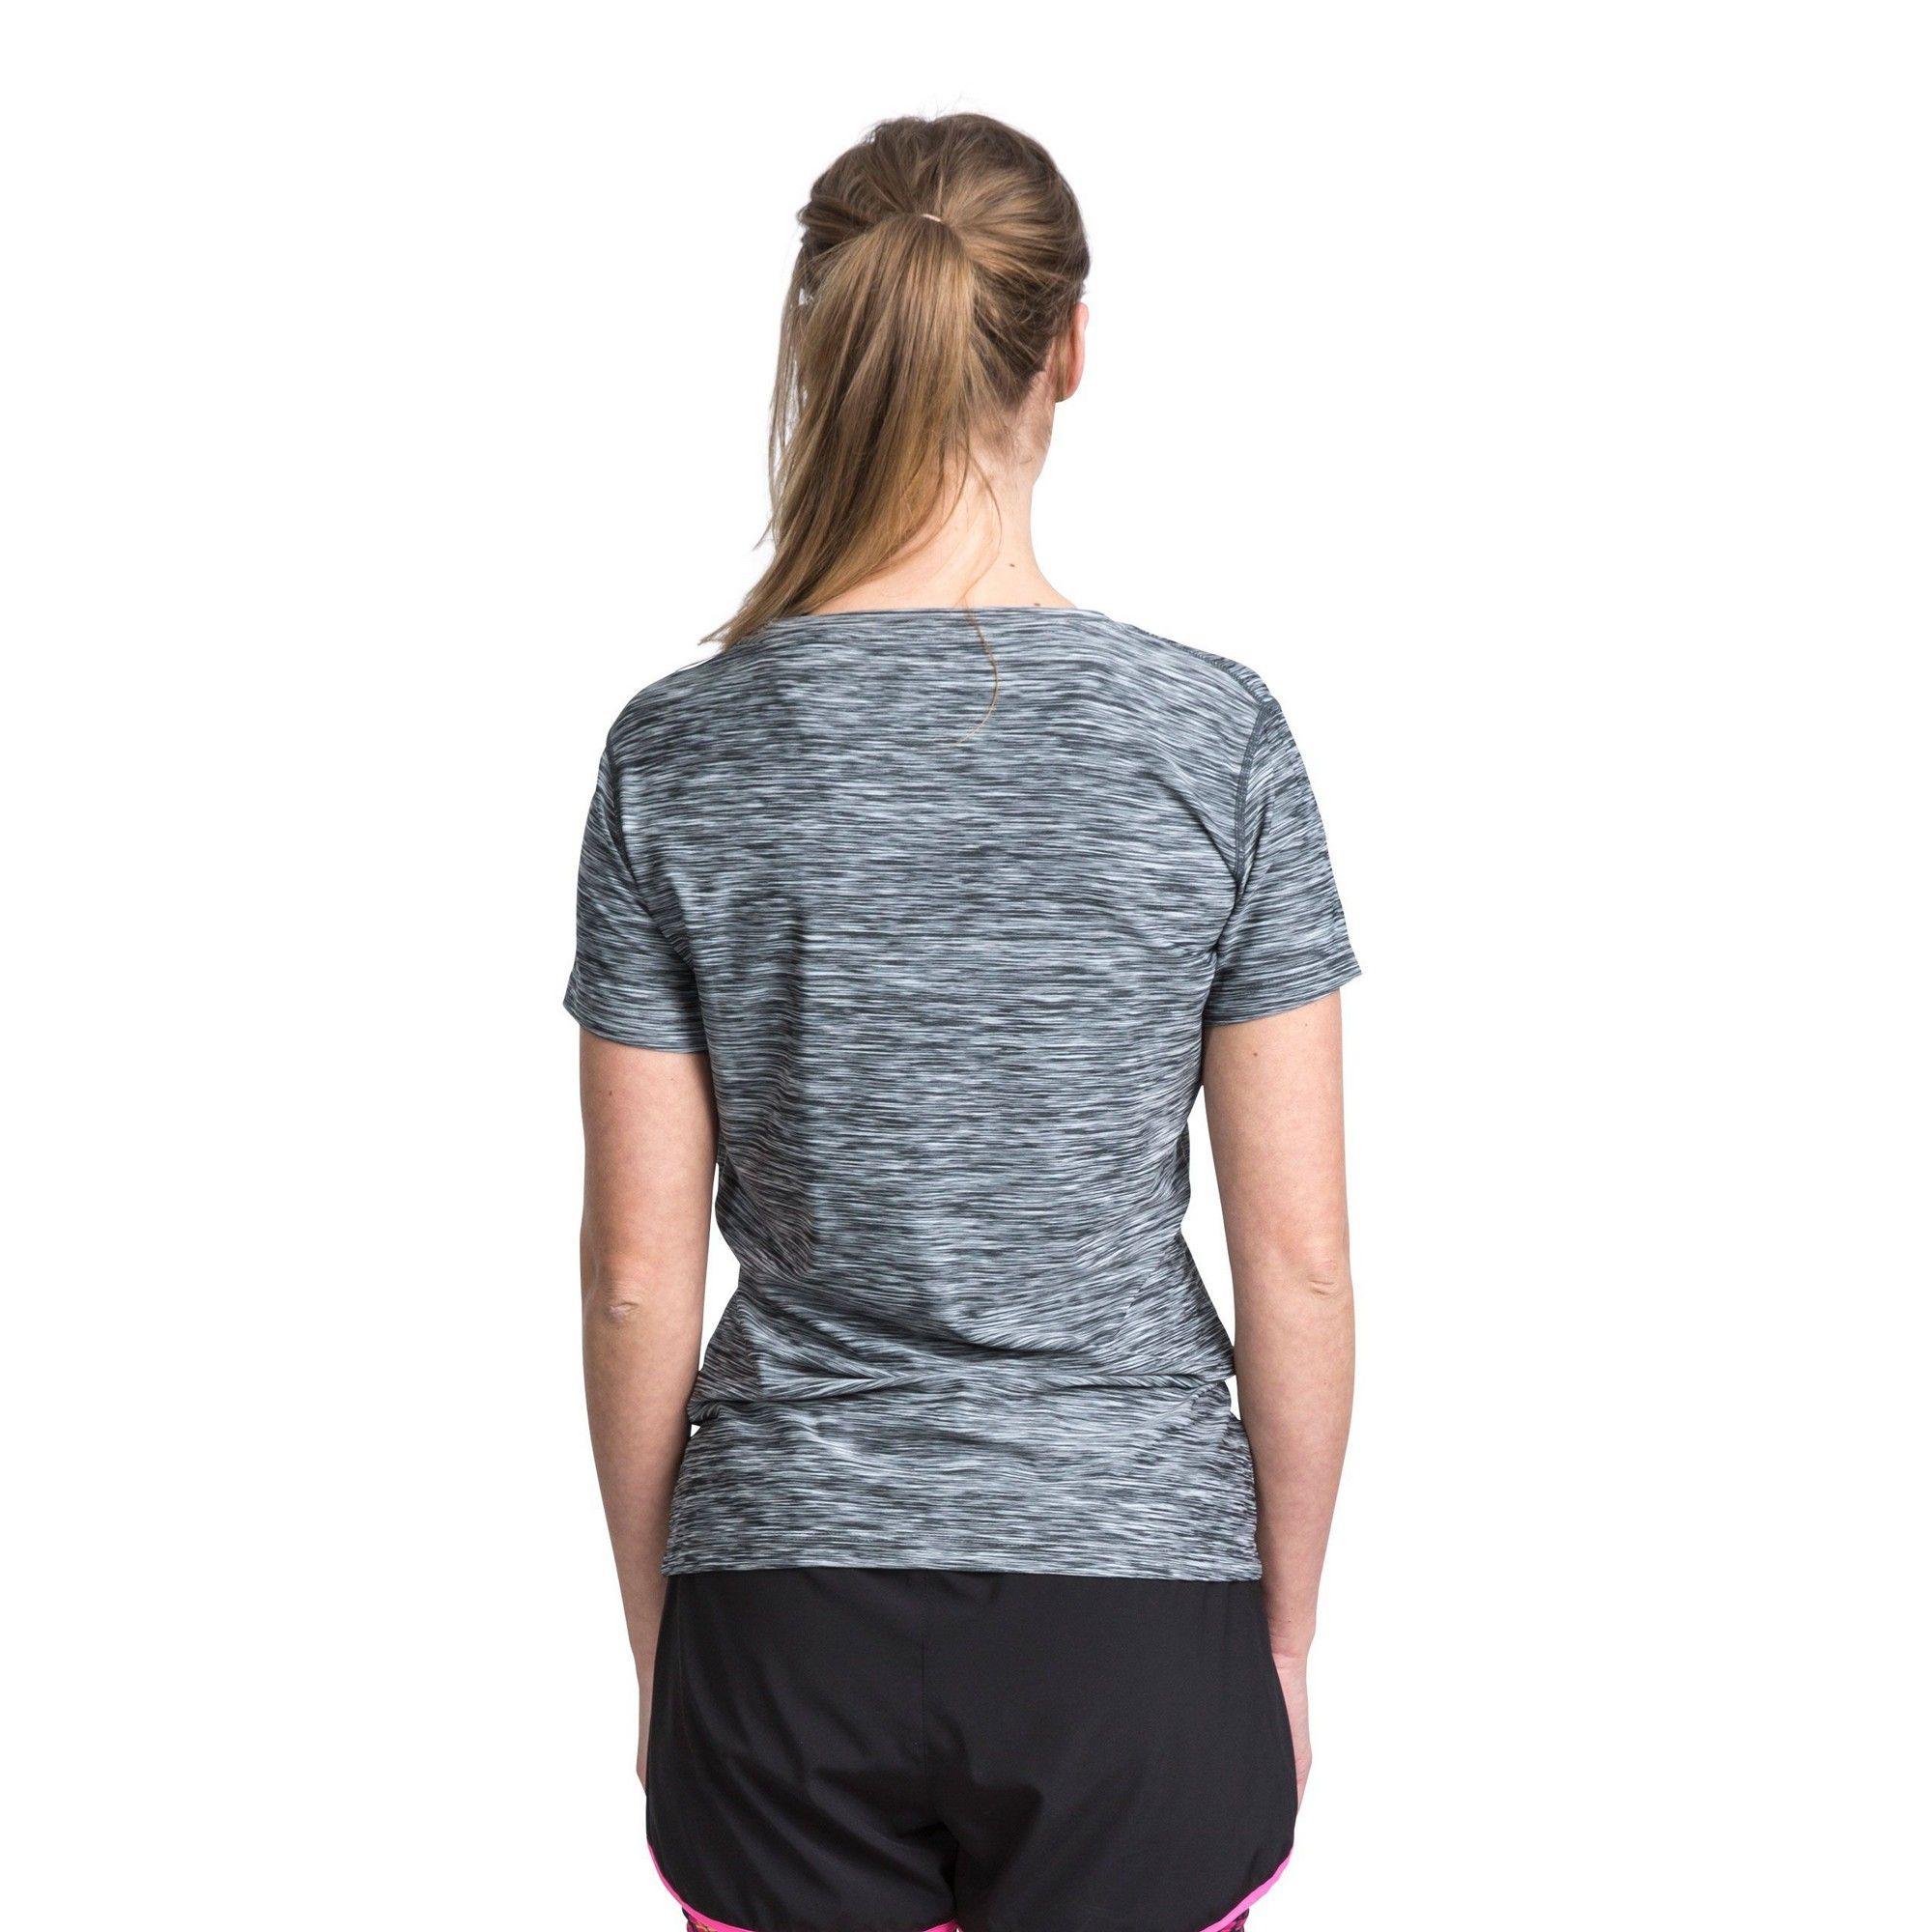 Short sleeve. Round neck. Reflective logos. Wicking. Quick dry. 91% Polyester/9% Elastane. Trespass Womens Chest Sizing (approx): XS/8 - 32in/81cm, S/10 - 34in/86cm, M/12 - 36in/91.4cm, L/14 - 38in/96.5cm, XL/16 - 40in/101.5cm, XXL/18 - 42in/106.5cm.